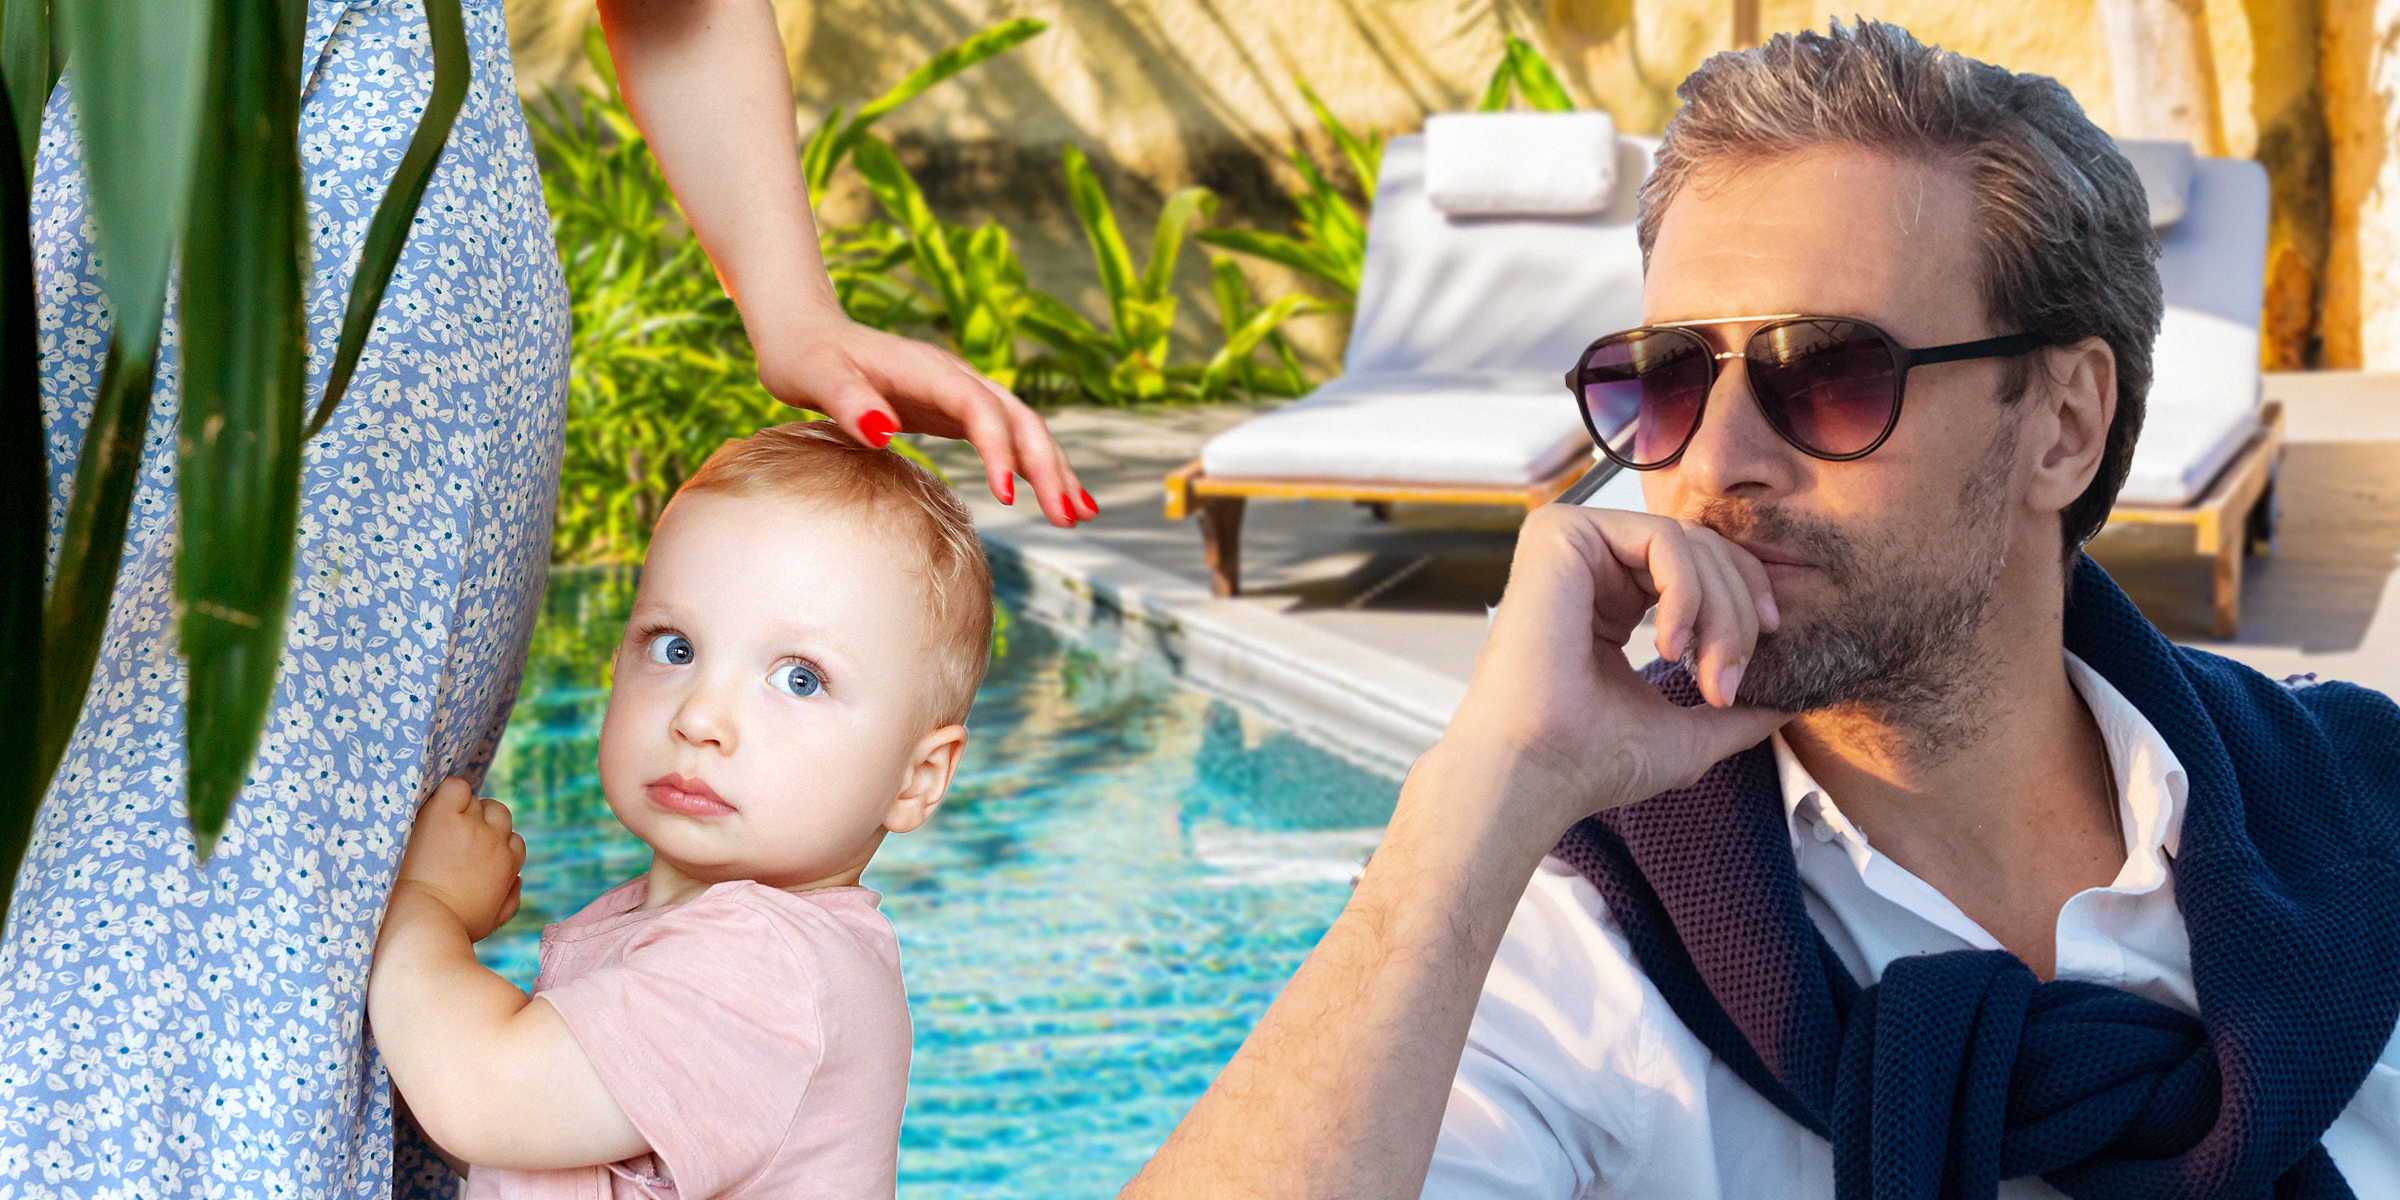 A mother with their son by the pool | A rich man by the pool | Source: Shutterstock